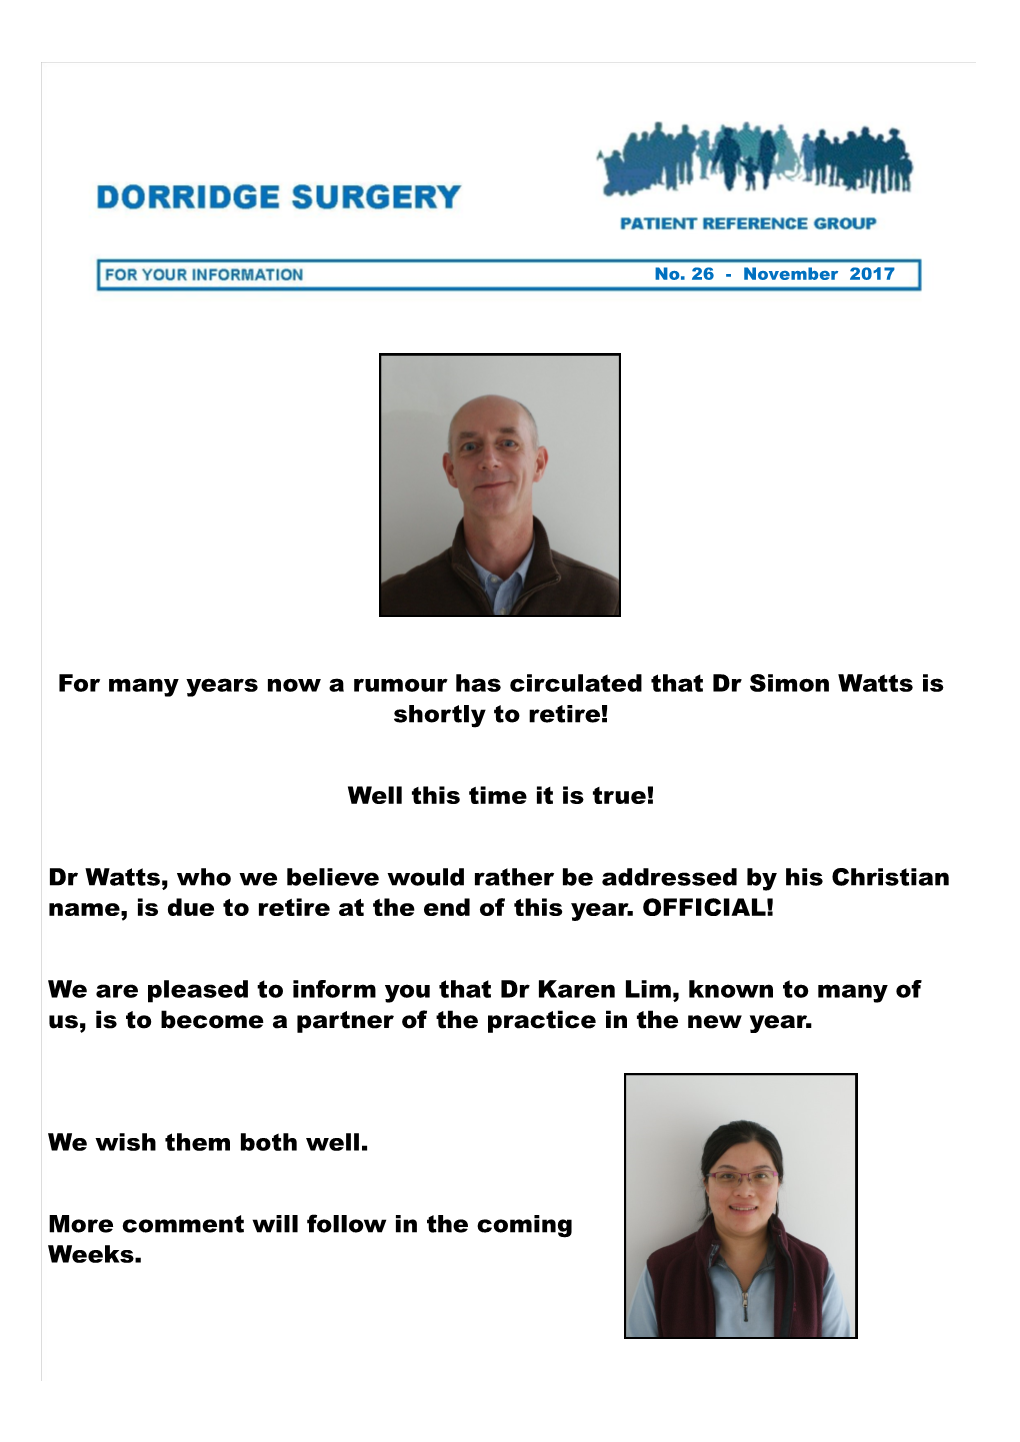 For Many Years Now a Rumour Has Circulated That Dr Simon Watts Is Shortly to Retire!